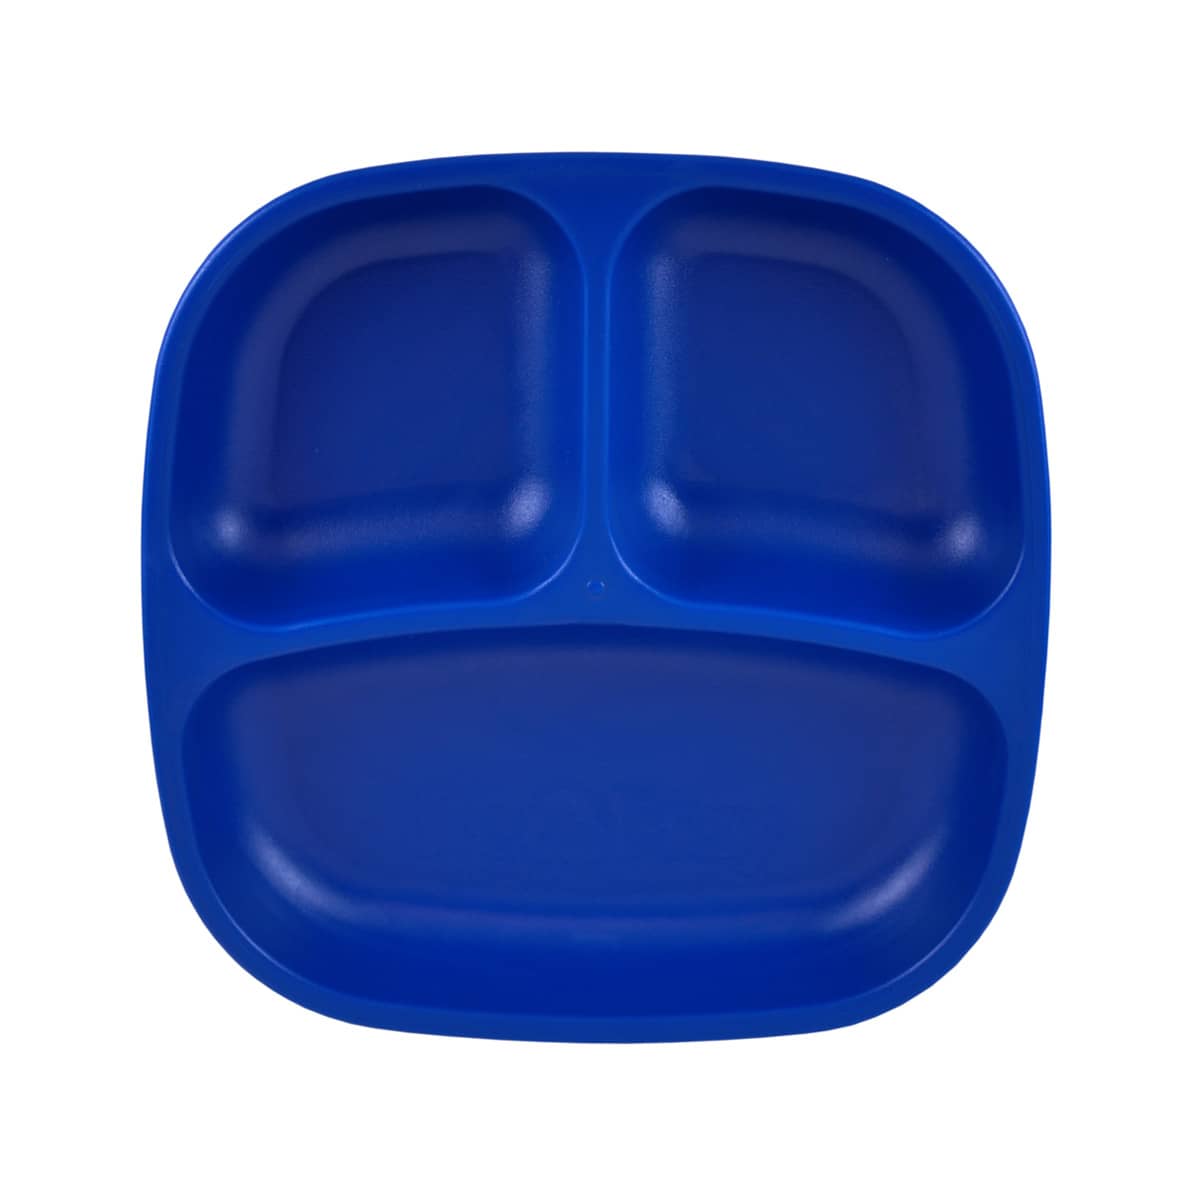 Re-Play Recycled Divided Plate - Navy Blue